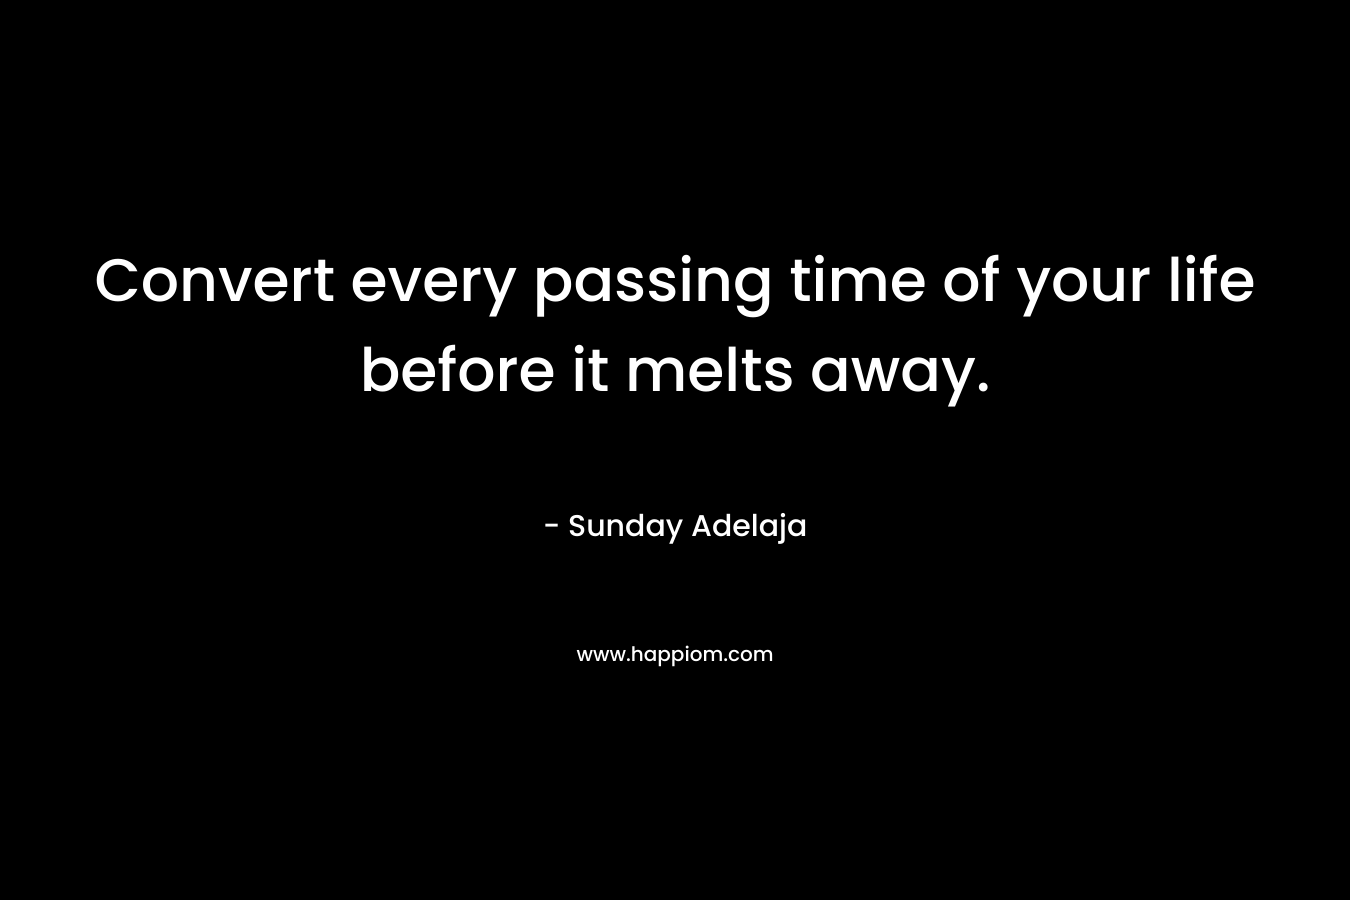 Convert every passing time of your life before it melts away.